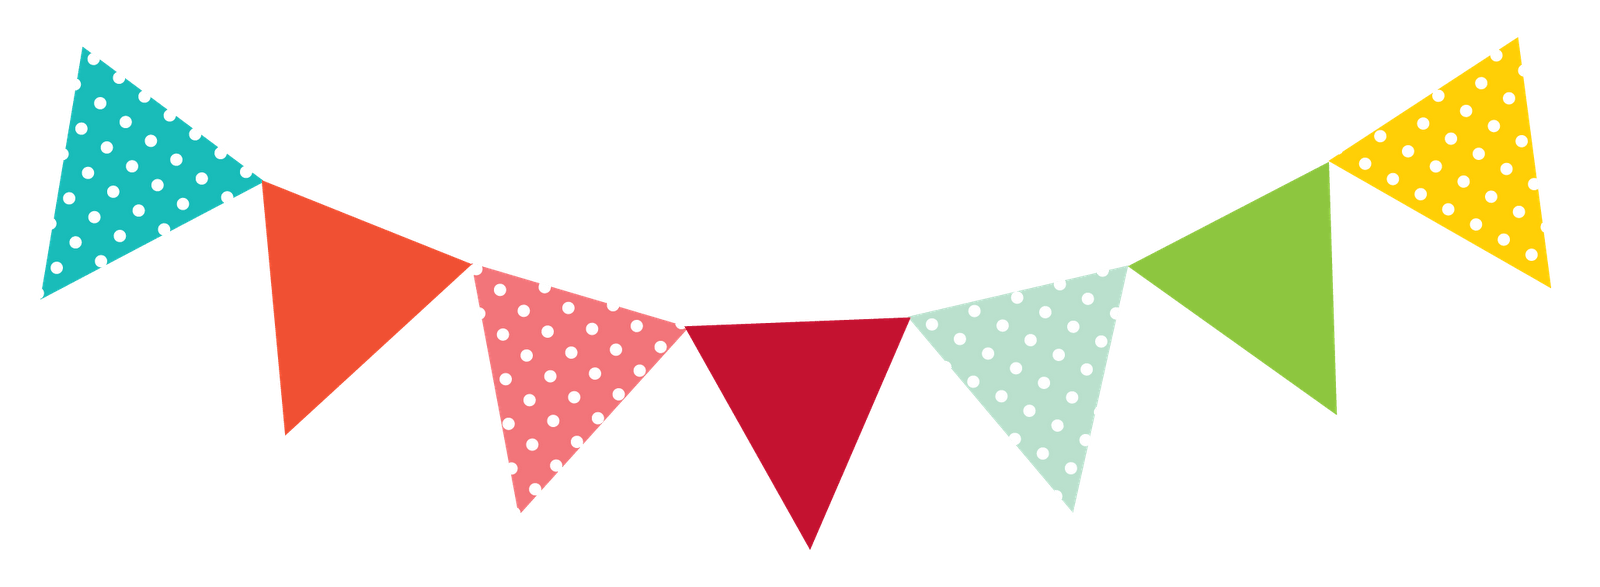 Carnival flag cliparts banner. Pennant clipart teal